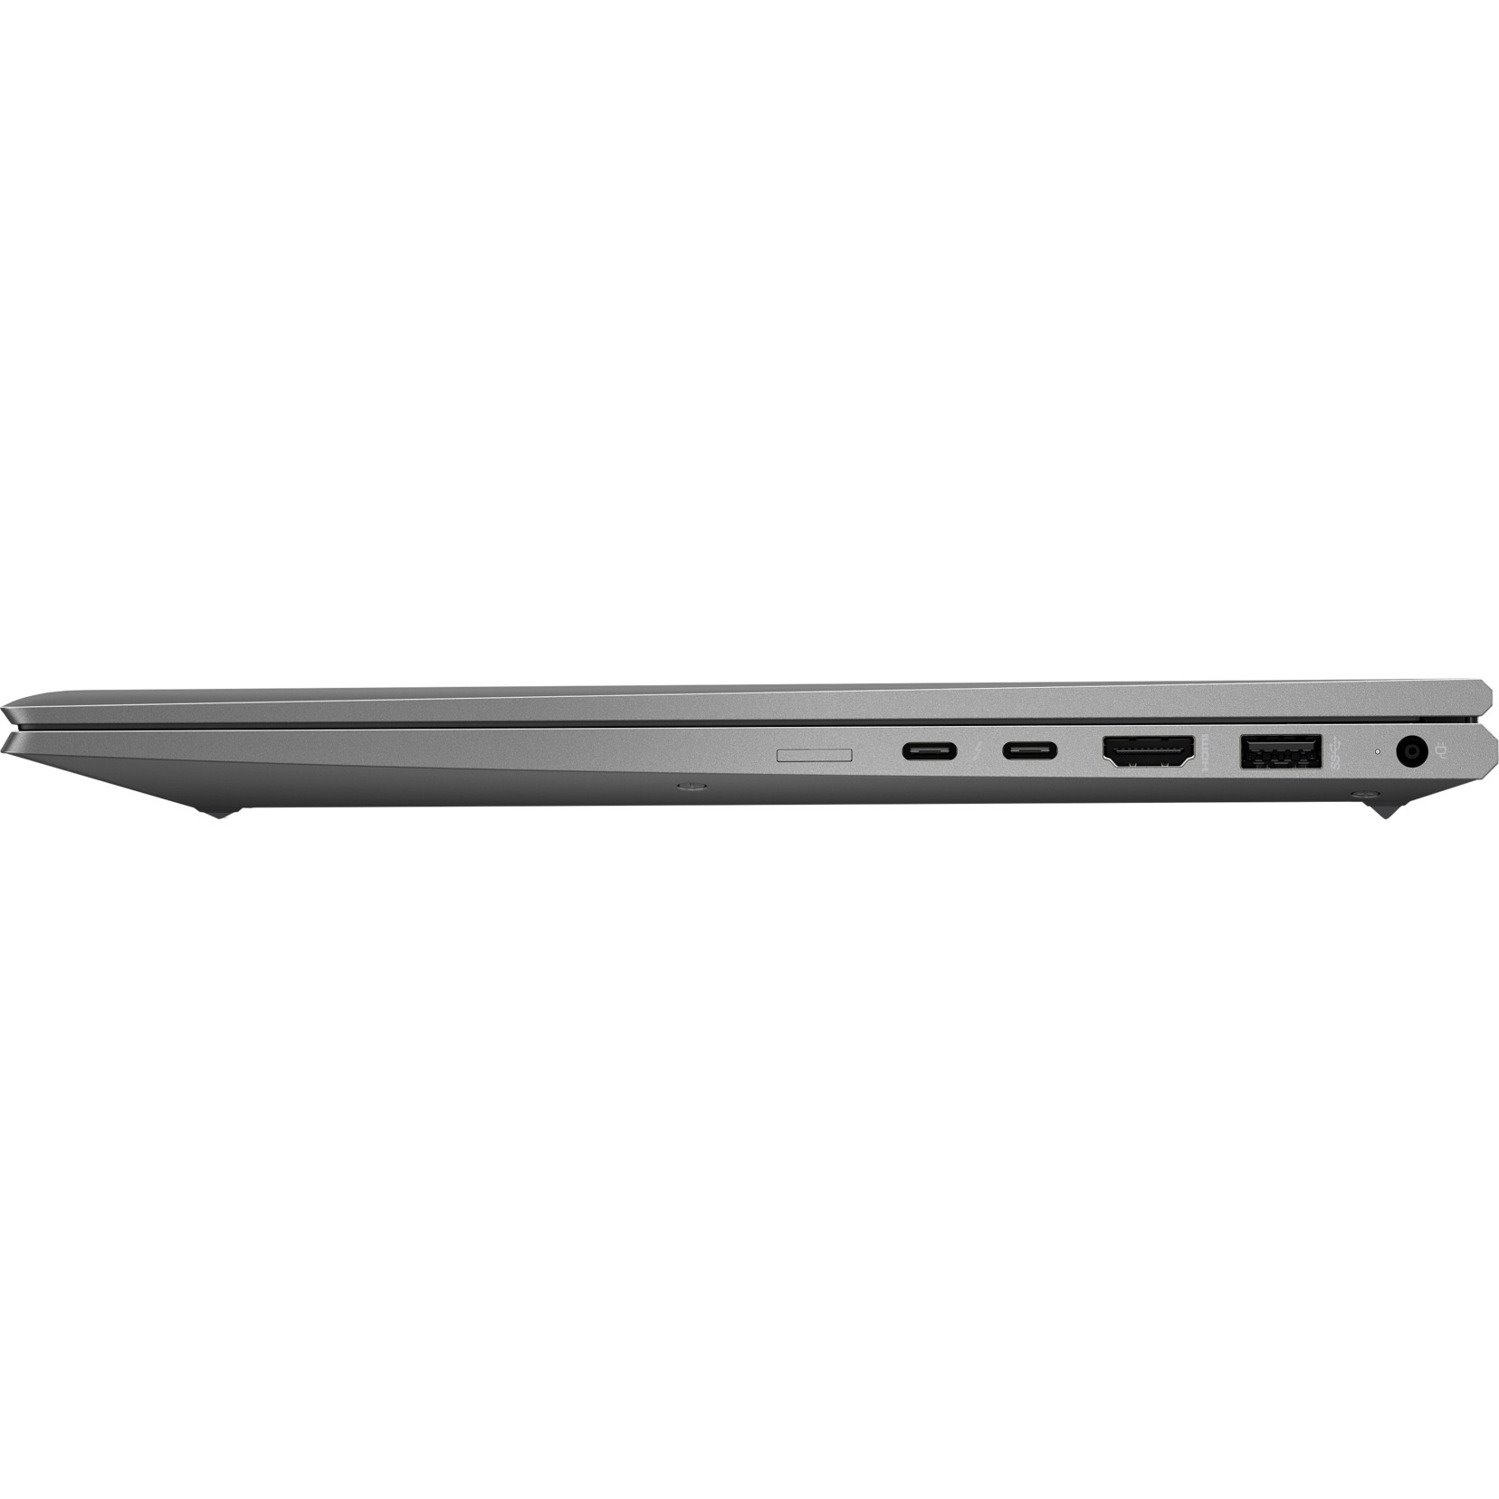 HP ZBook Firefly 15 G8 15.6" Mobile Workstation - Full HD - 1920 x 1080 - Intel Core i7 11th Gen i7-1165G7 Quad-core (4 Core) 2.80 GHz - 32 GB Total RAM - 512 GB SSD